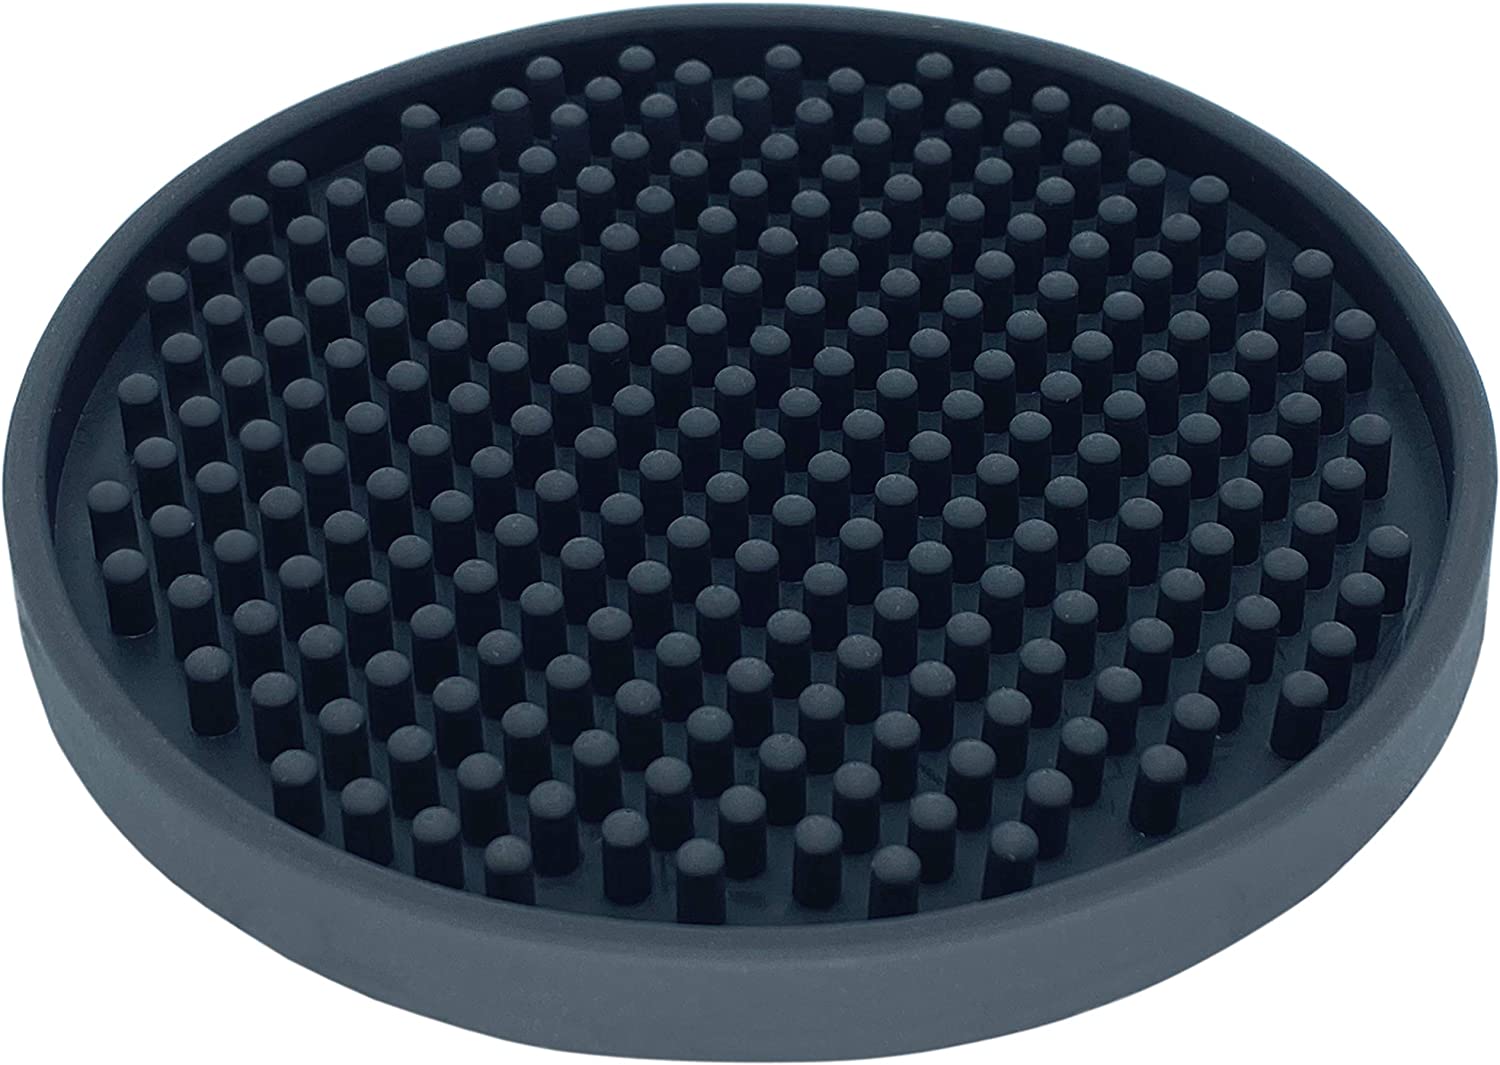 Scarlet Espresso | Tappetino Professionale Tamper Mat & Tray for Baristas, Tamping Mat Made of Robust Natural Rubber, Prevents Slipping, Easy to Clean (Size XS)